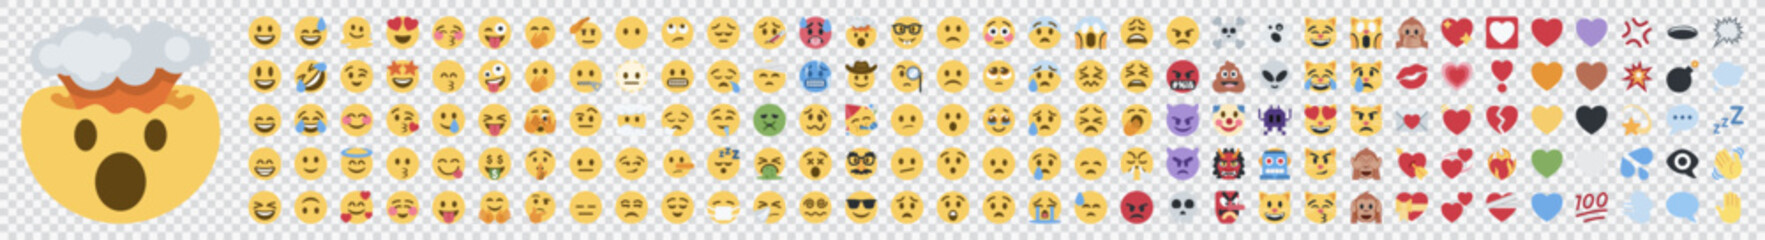 Big set of yellow emoji. Funny emoticons faces with facial expressions. On transparent background.